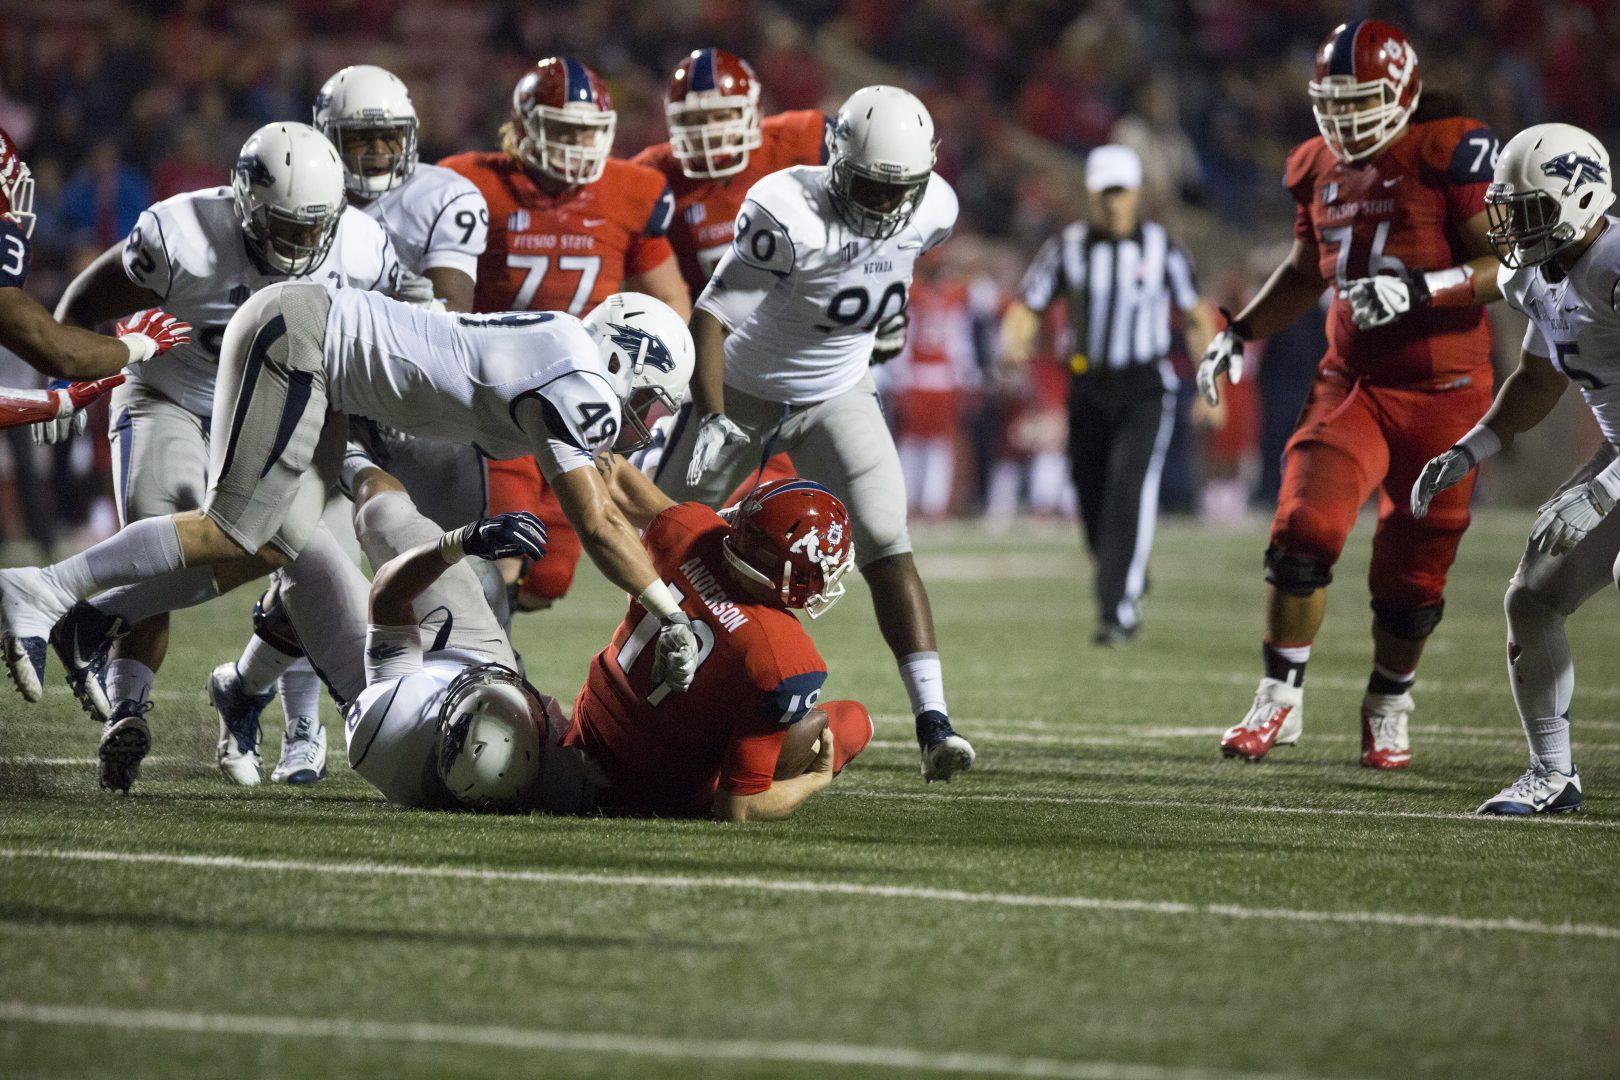 Fresno State lost to Nevada for the second straight year on Saturday 22-27 in Reno. Last season the team lost 30-16 at home in Bulldog Stadium. (File Photo/The Collegian)